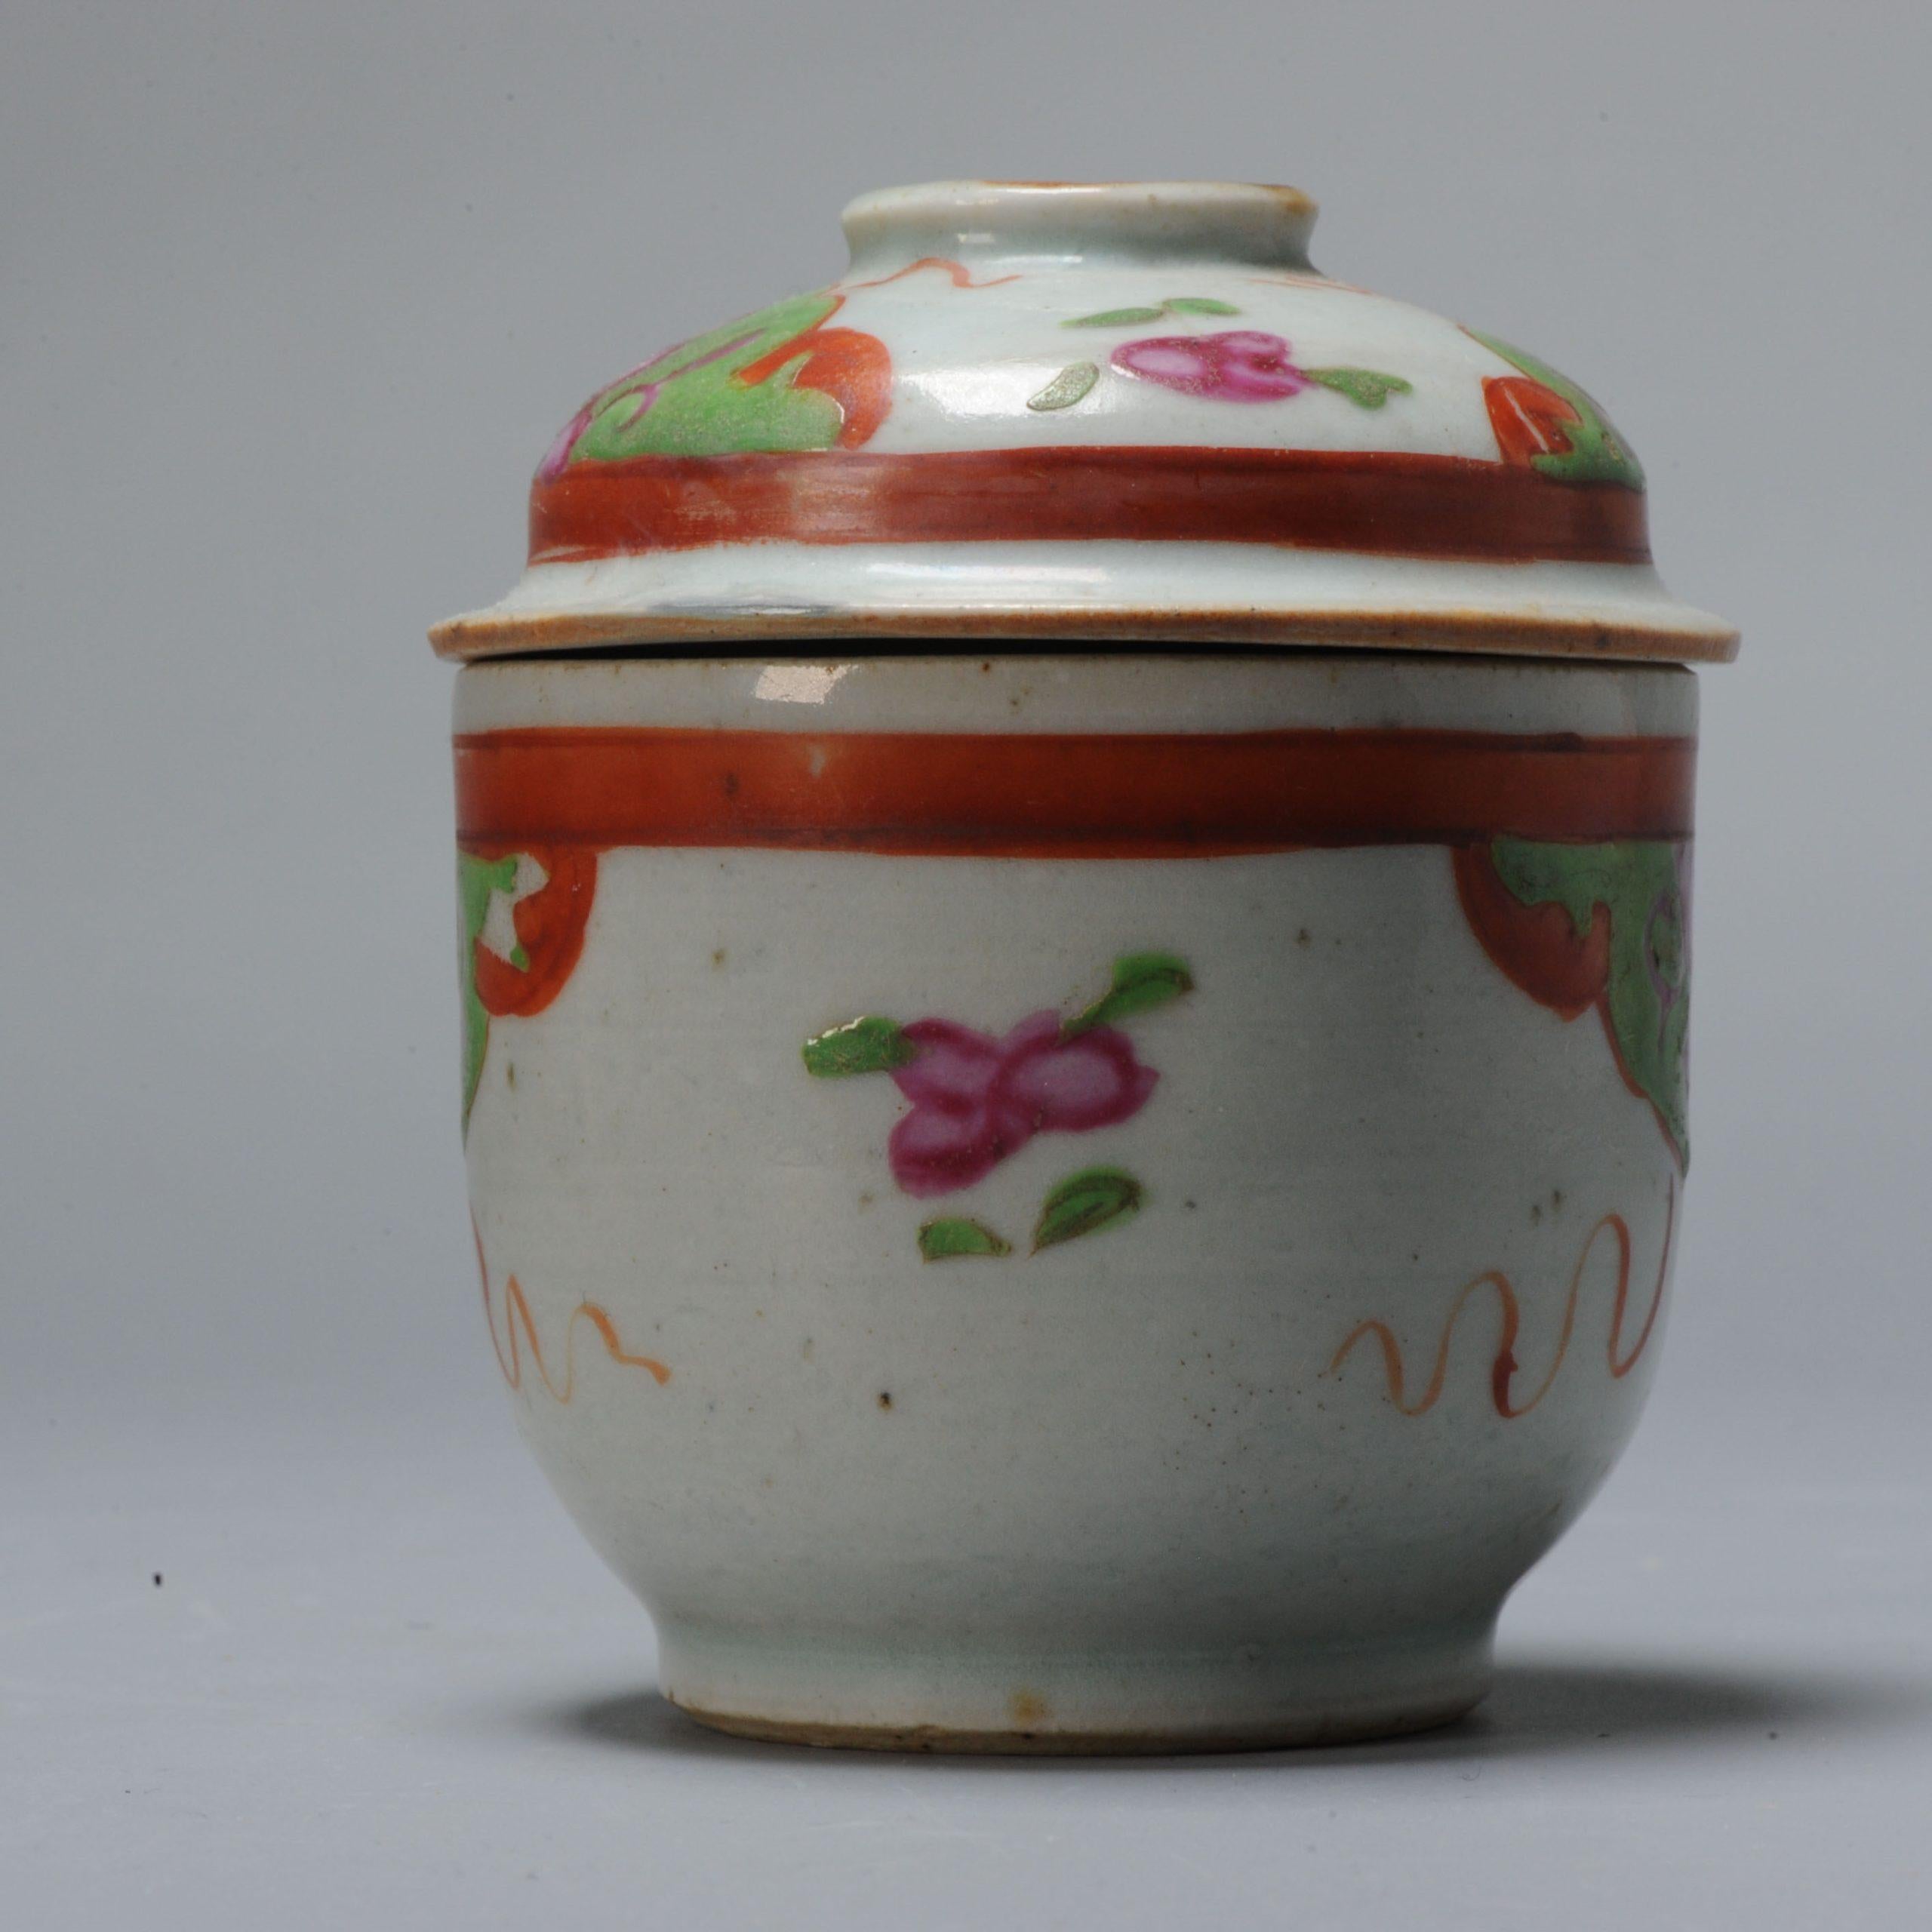 Great quality painting and color in the typical style of these pieces.

Additional information:
Material: Porcelain & Pottery
Type: Jars
Region of Origin: China
Emperor: Qianlong (1735-1796)
Period: 18th century Qing (1661 - 1912)
Age: